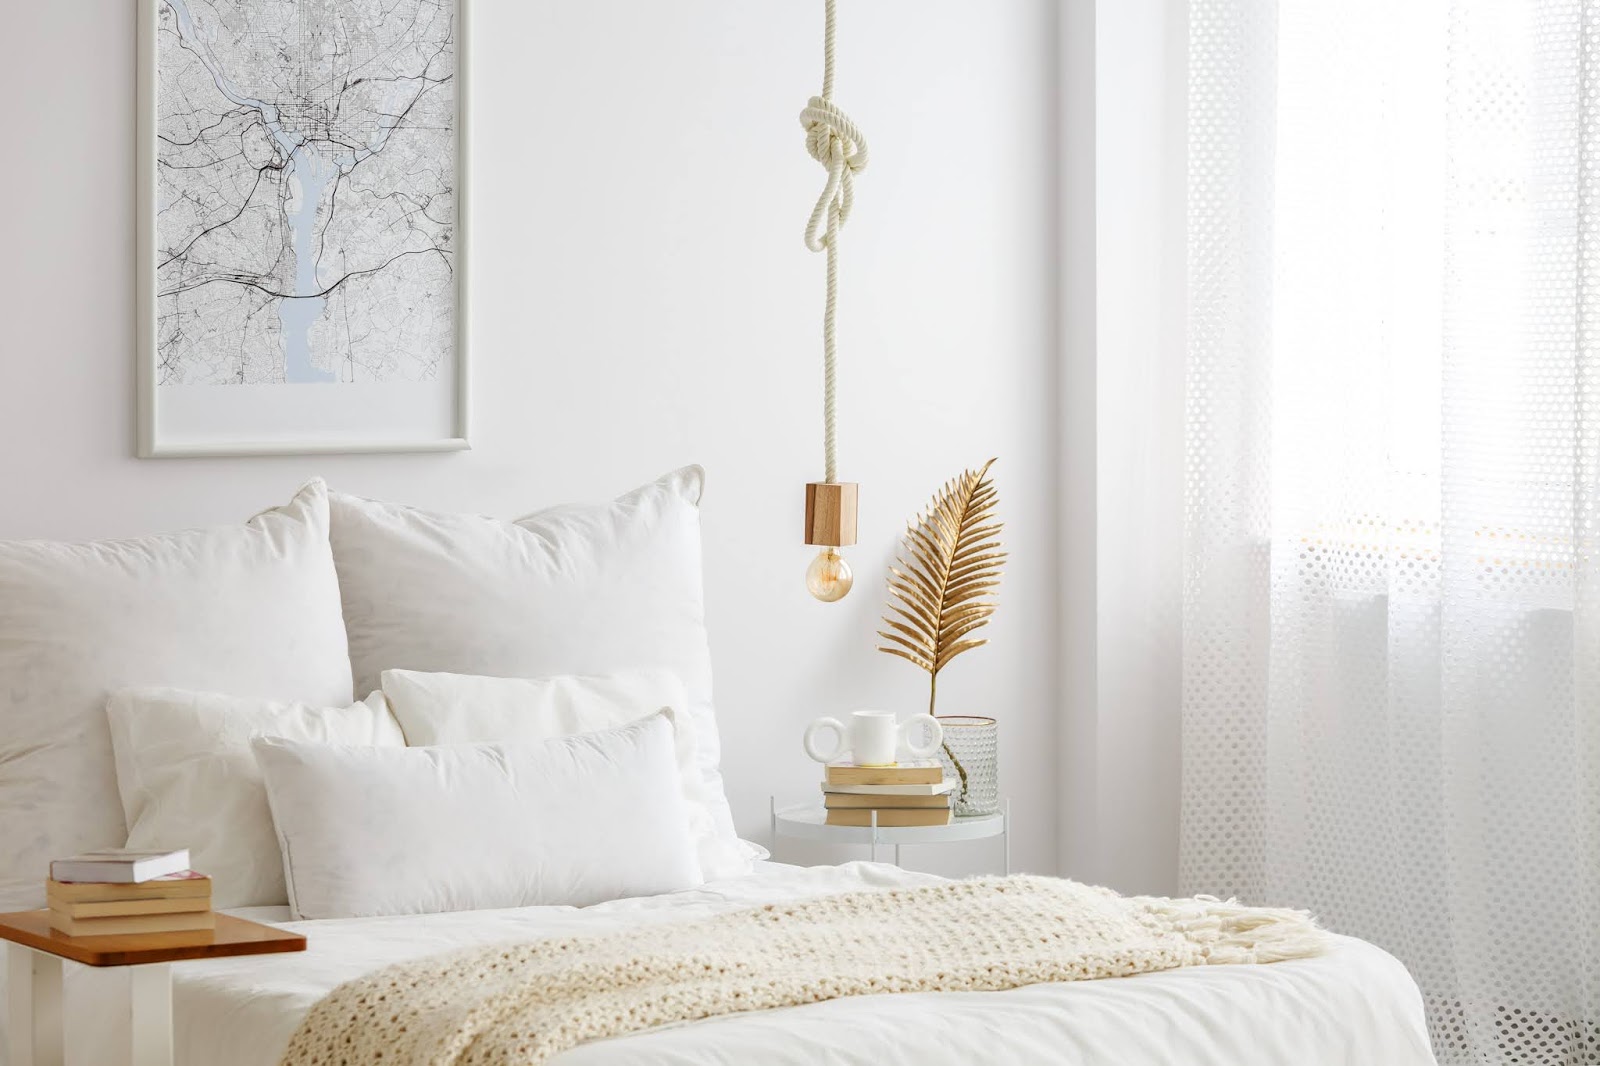 How to use soft furnishings to transform your bedroom and aid a good nights sleep